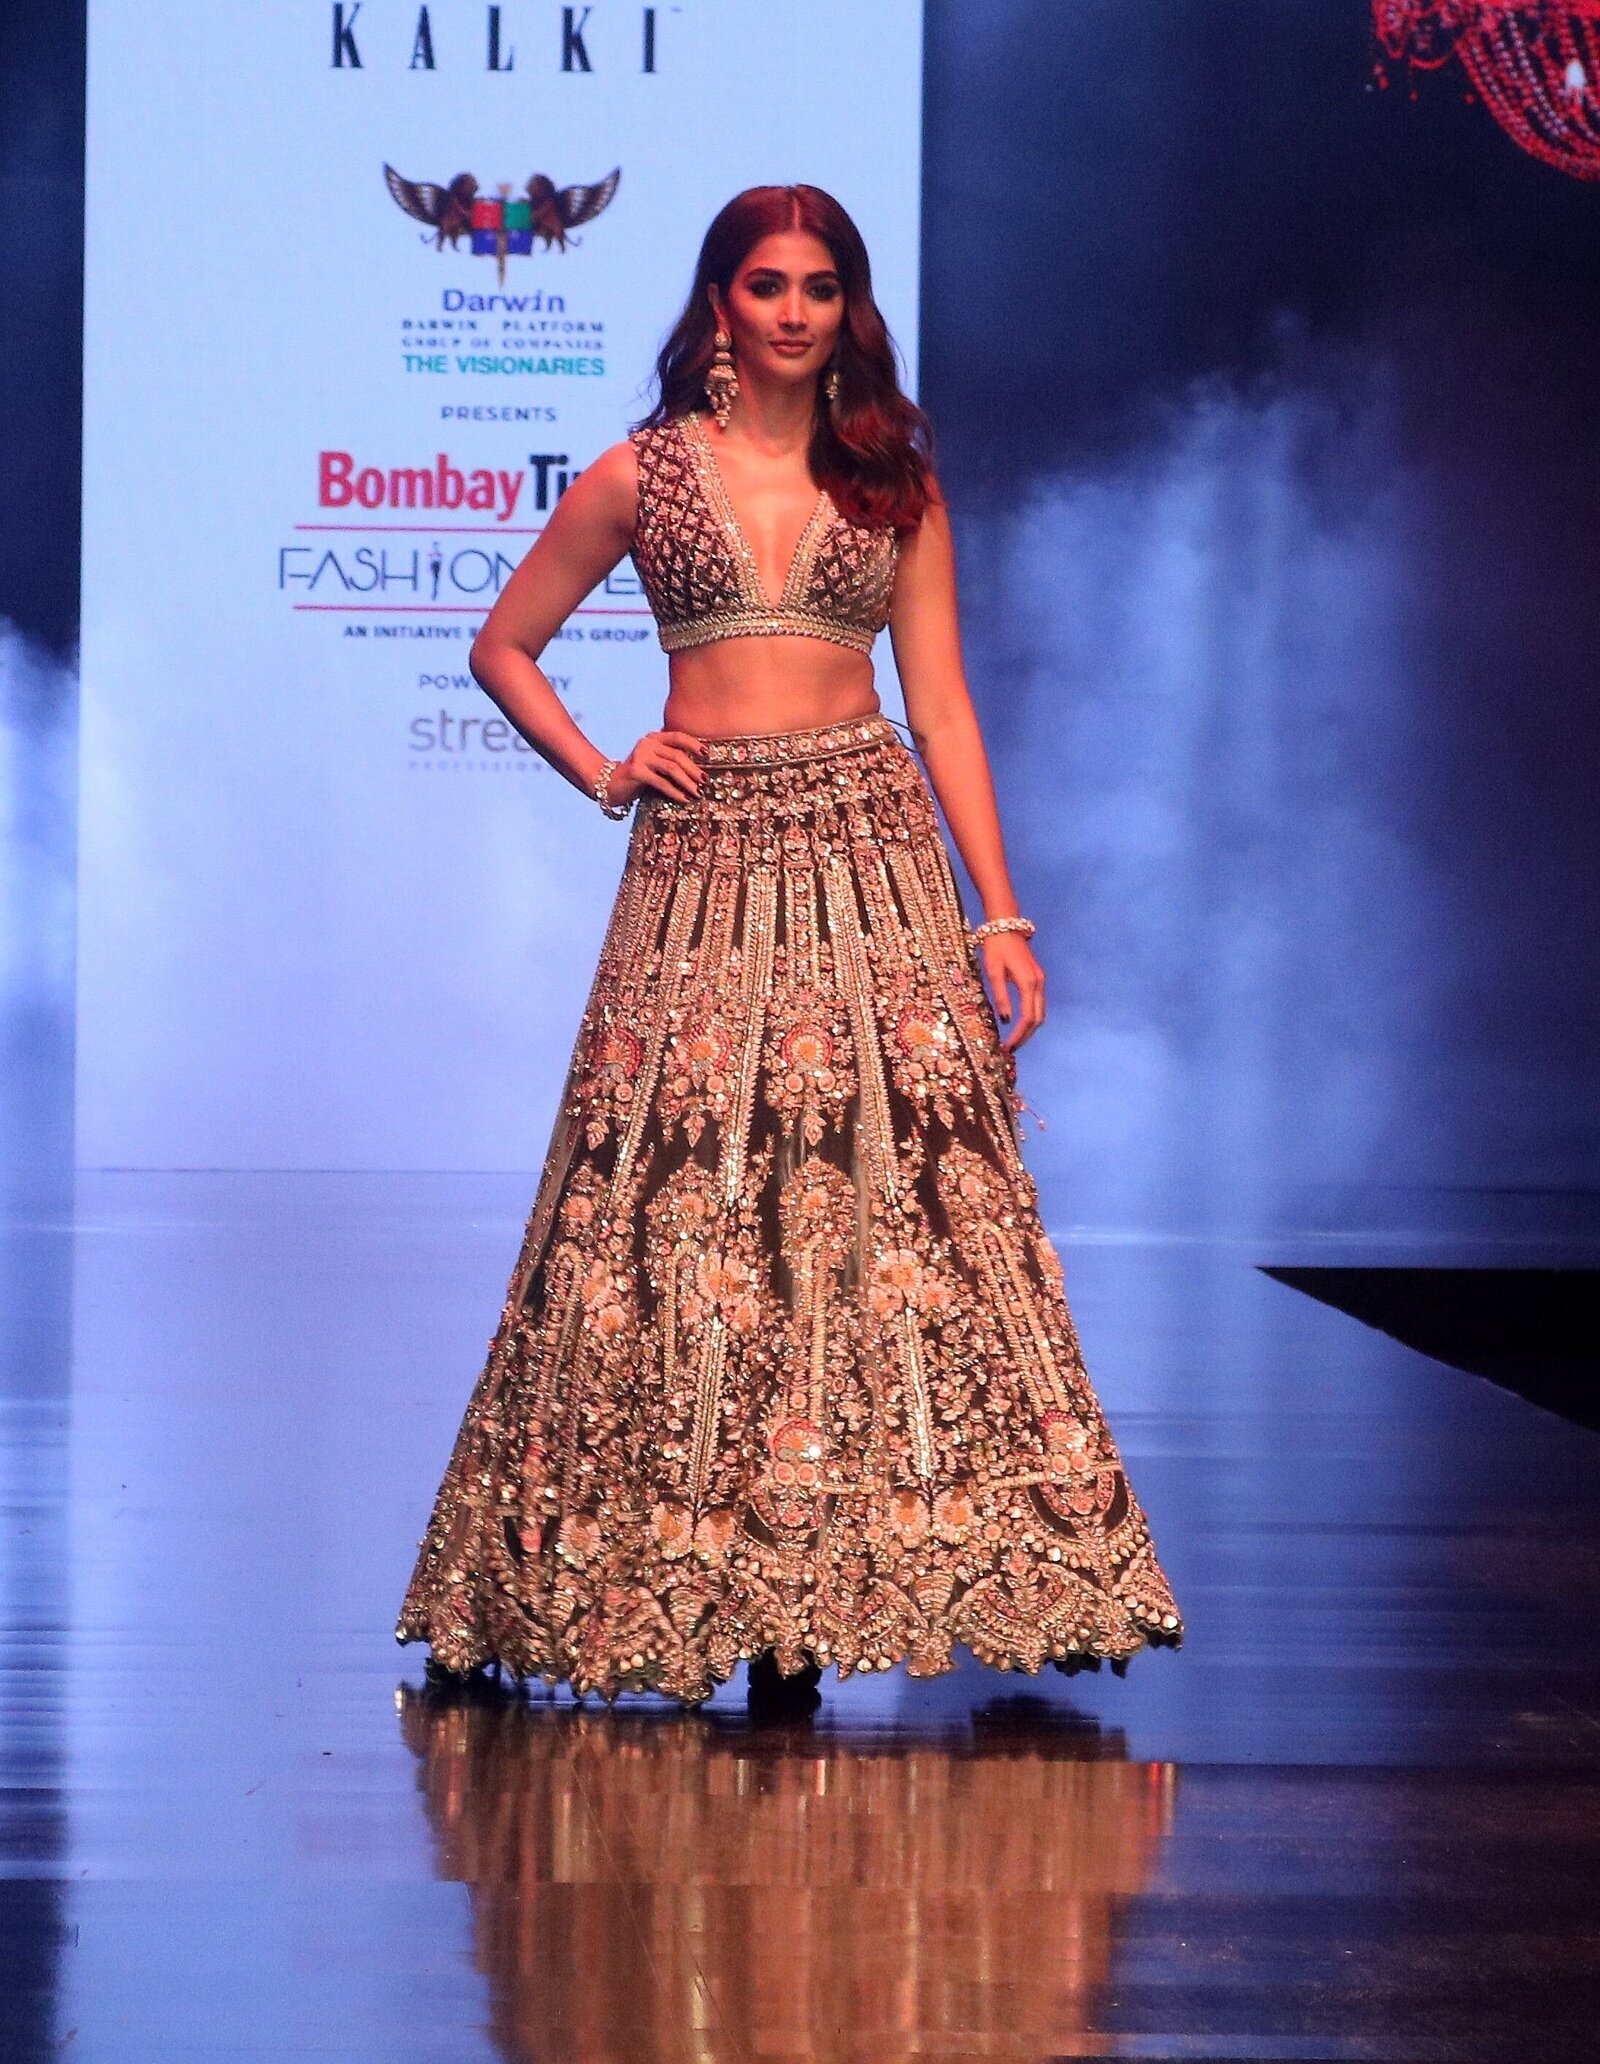 Pooja Hegde - Photos: Celebs Walks The Ramp At Bombay Times Fashion Week 2021 | Picture 1828721